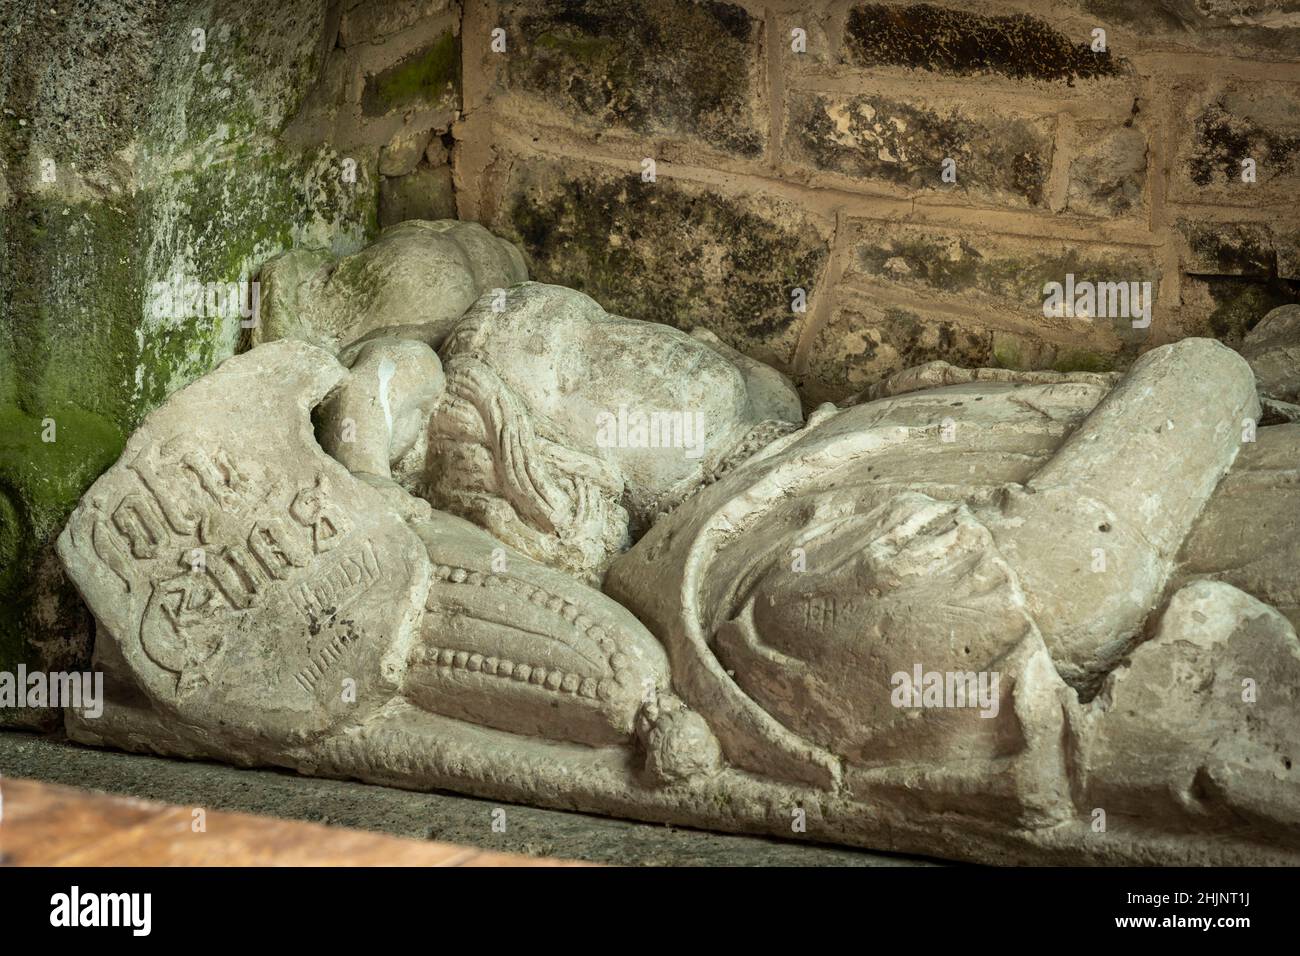 Stone Effigy of John Evans, now suspected to be the deposed King Edward V, one of the two Princes in the Tower, Coldridge, Devon. Stock Photo